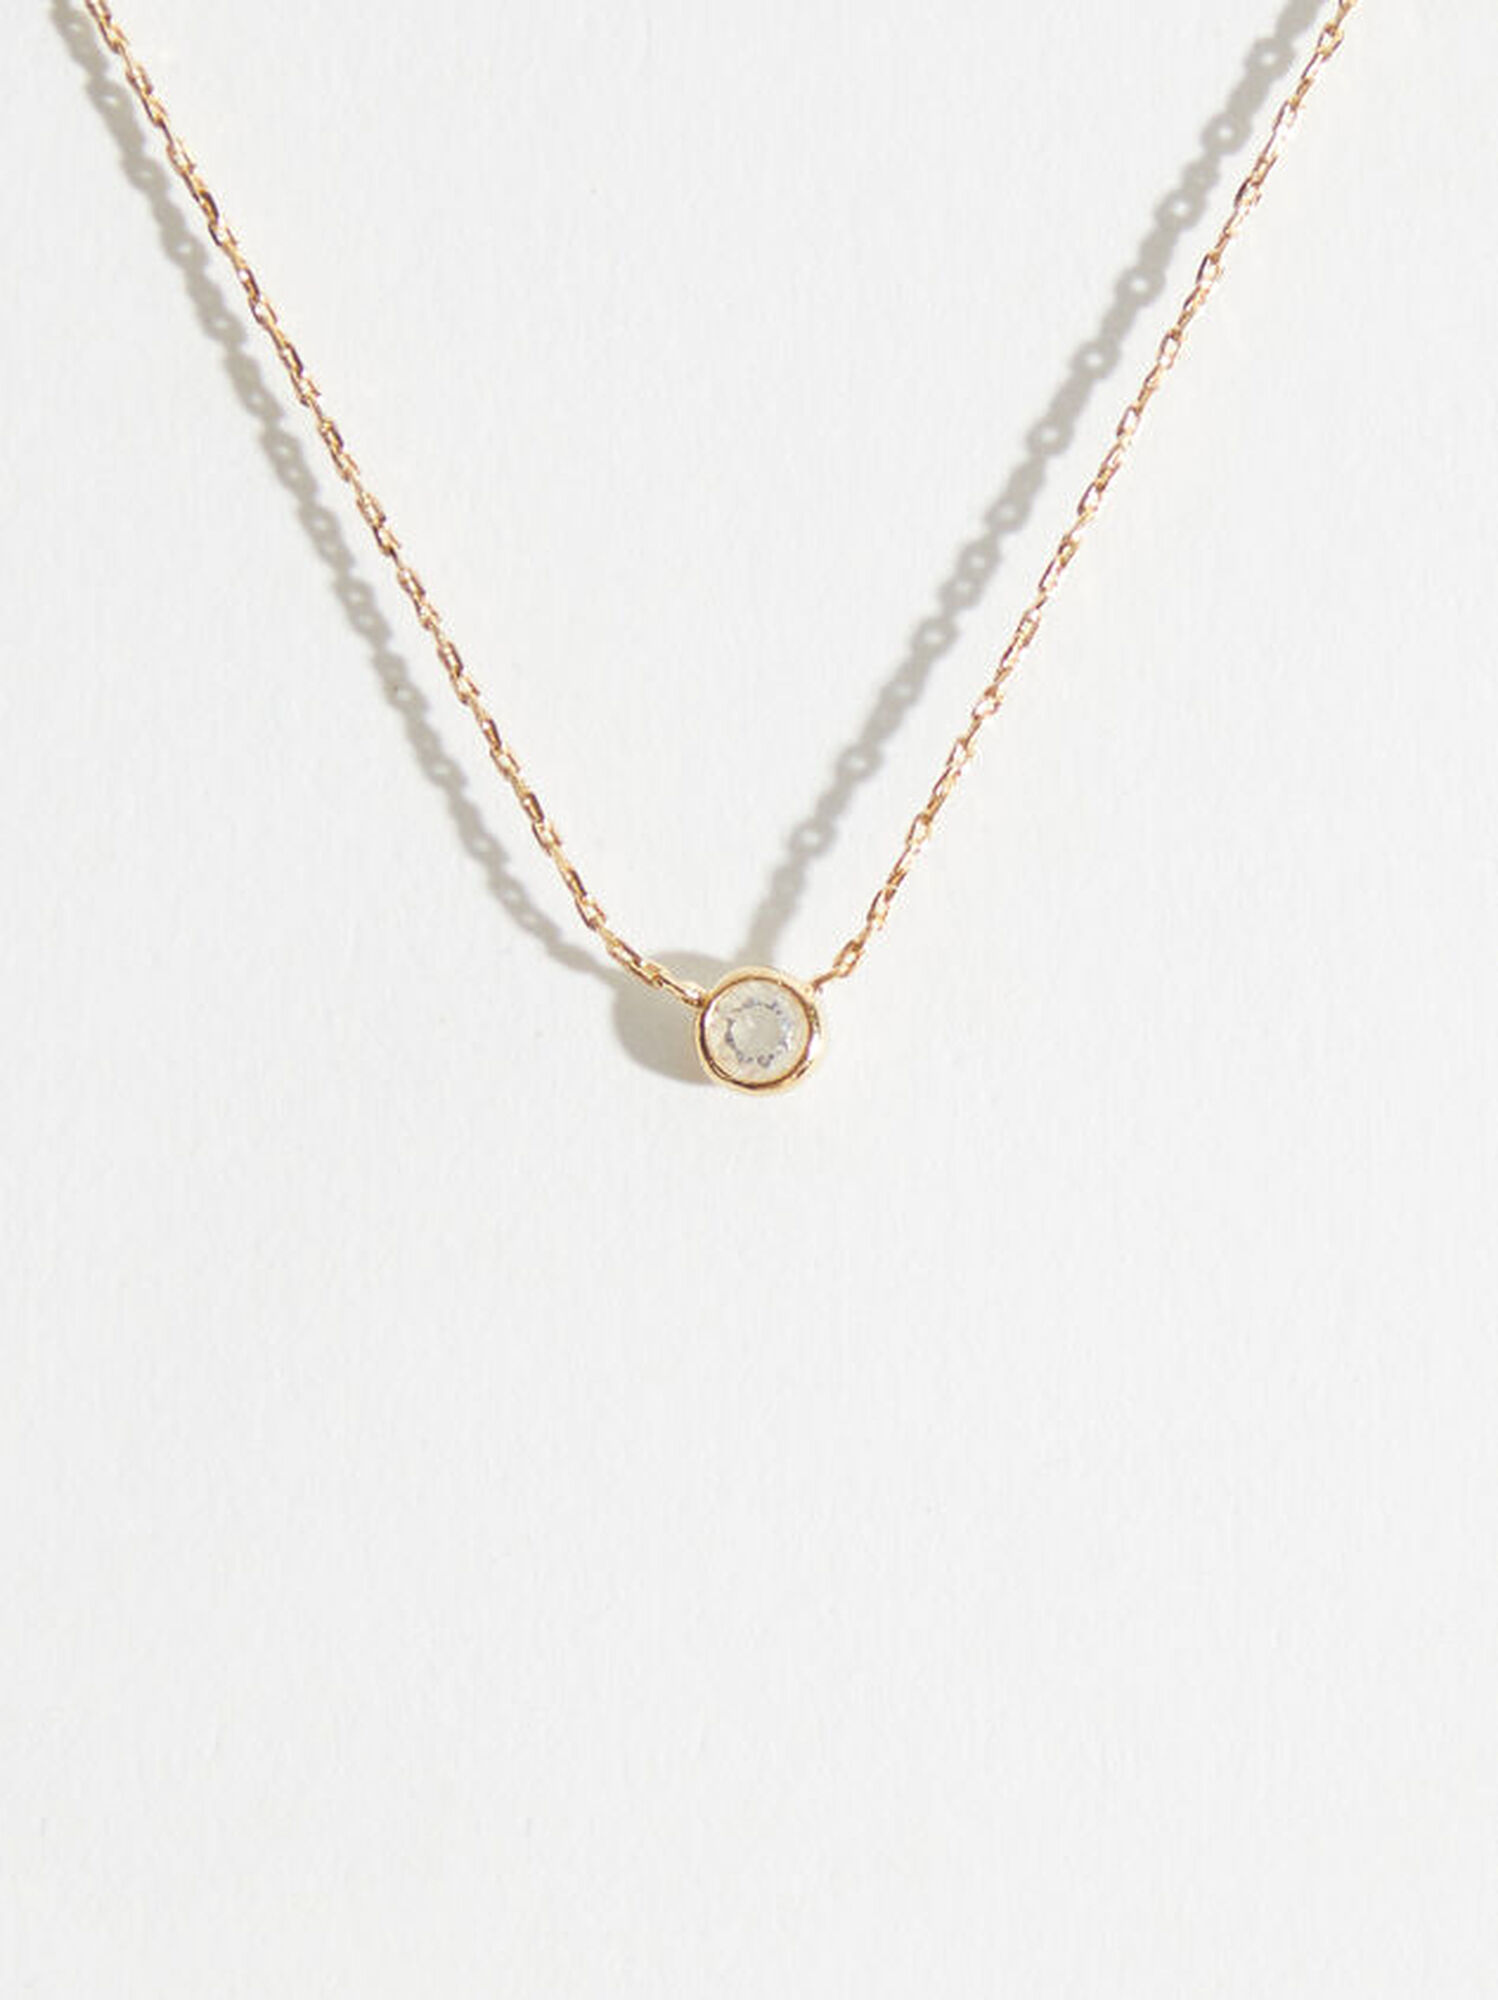 Dainty Chanel Charm Necklace - Gold